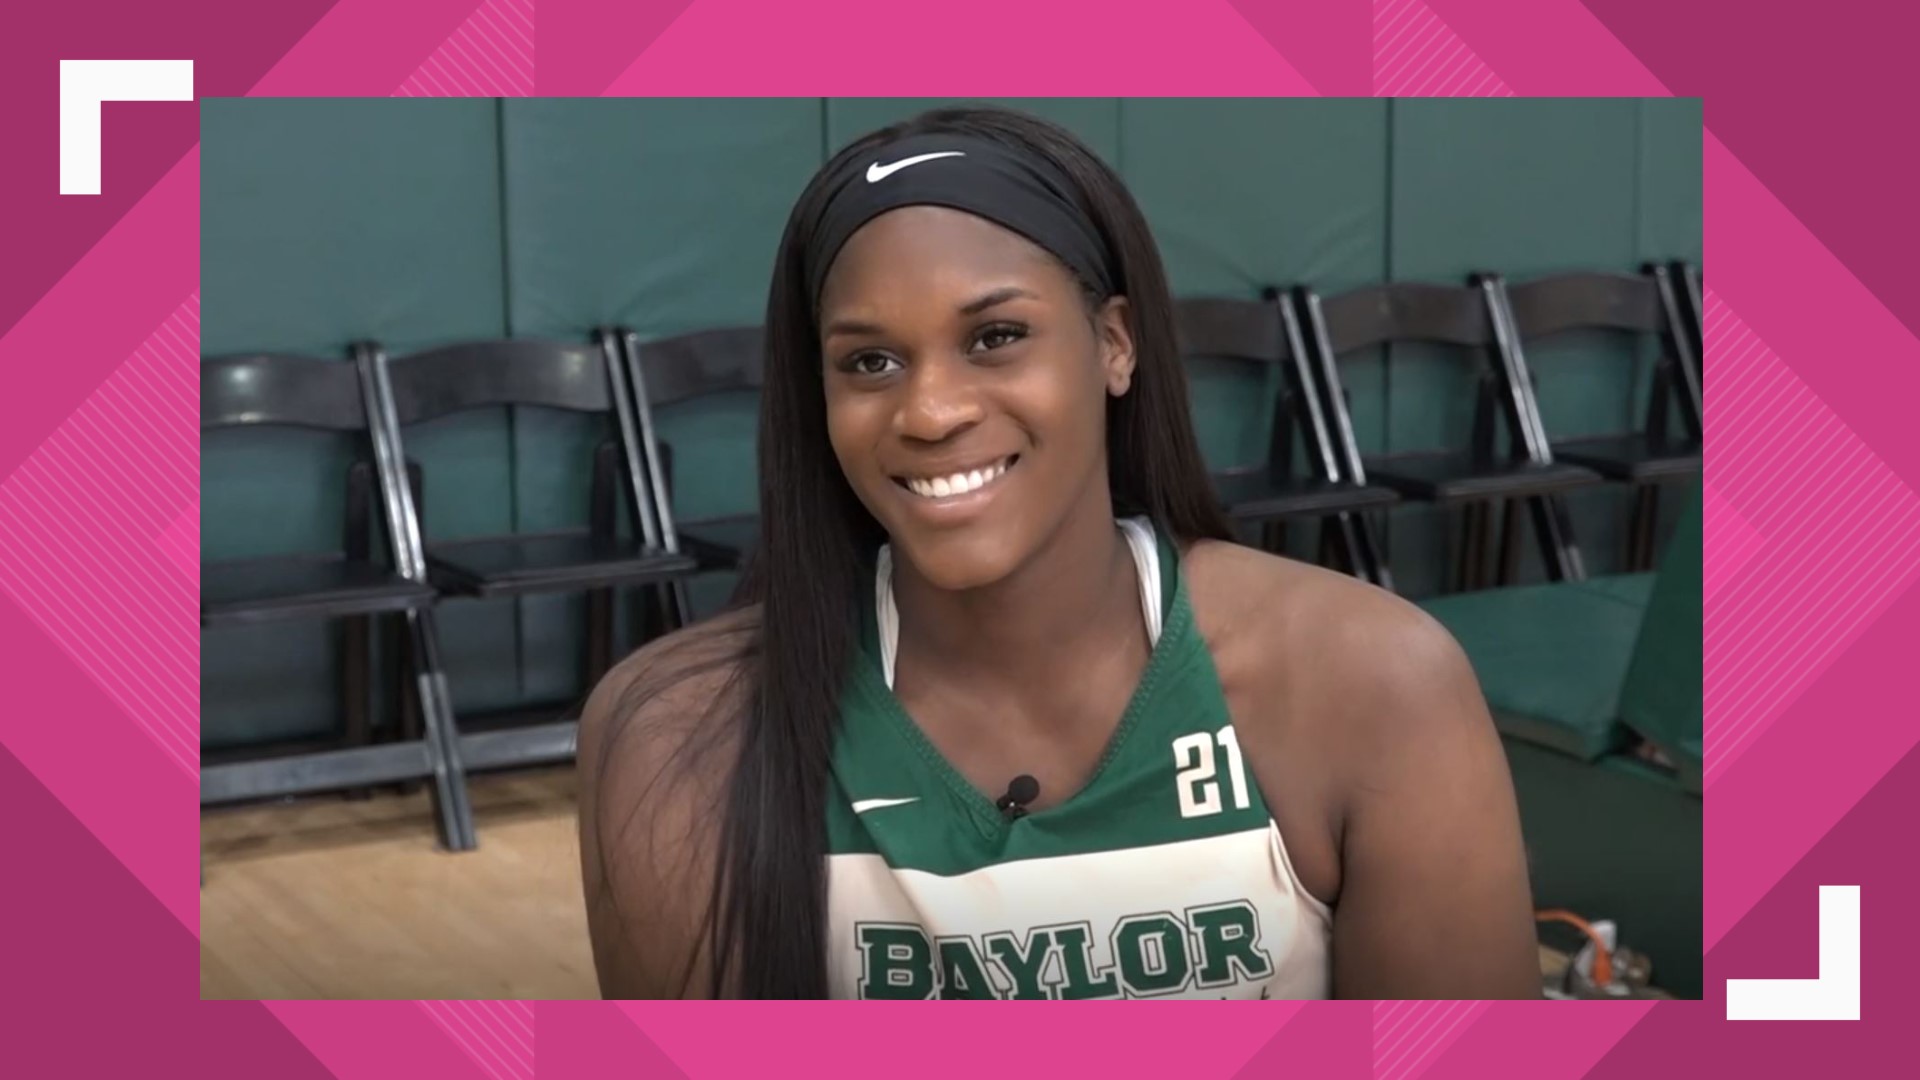 Baylor senior center Kalani Brown has entered elite company. Brown joins Brittney Griner as the only players in Lady Bears history to be selected to the Women's Basketball Coaches Association All-American team three times.